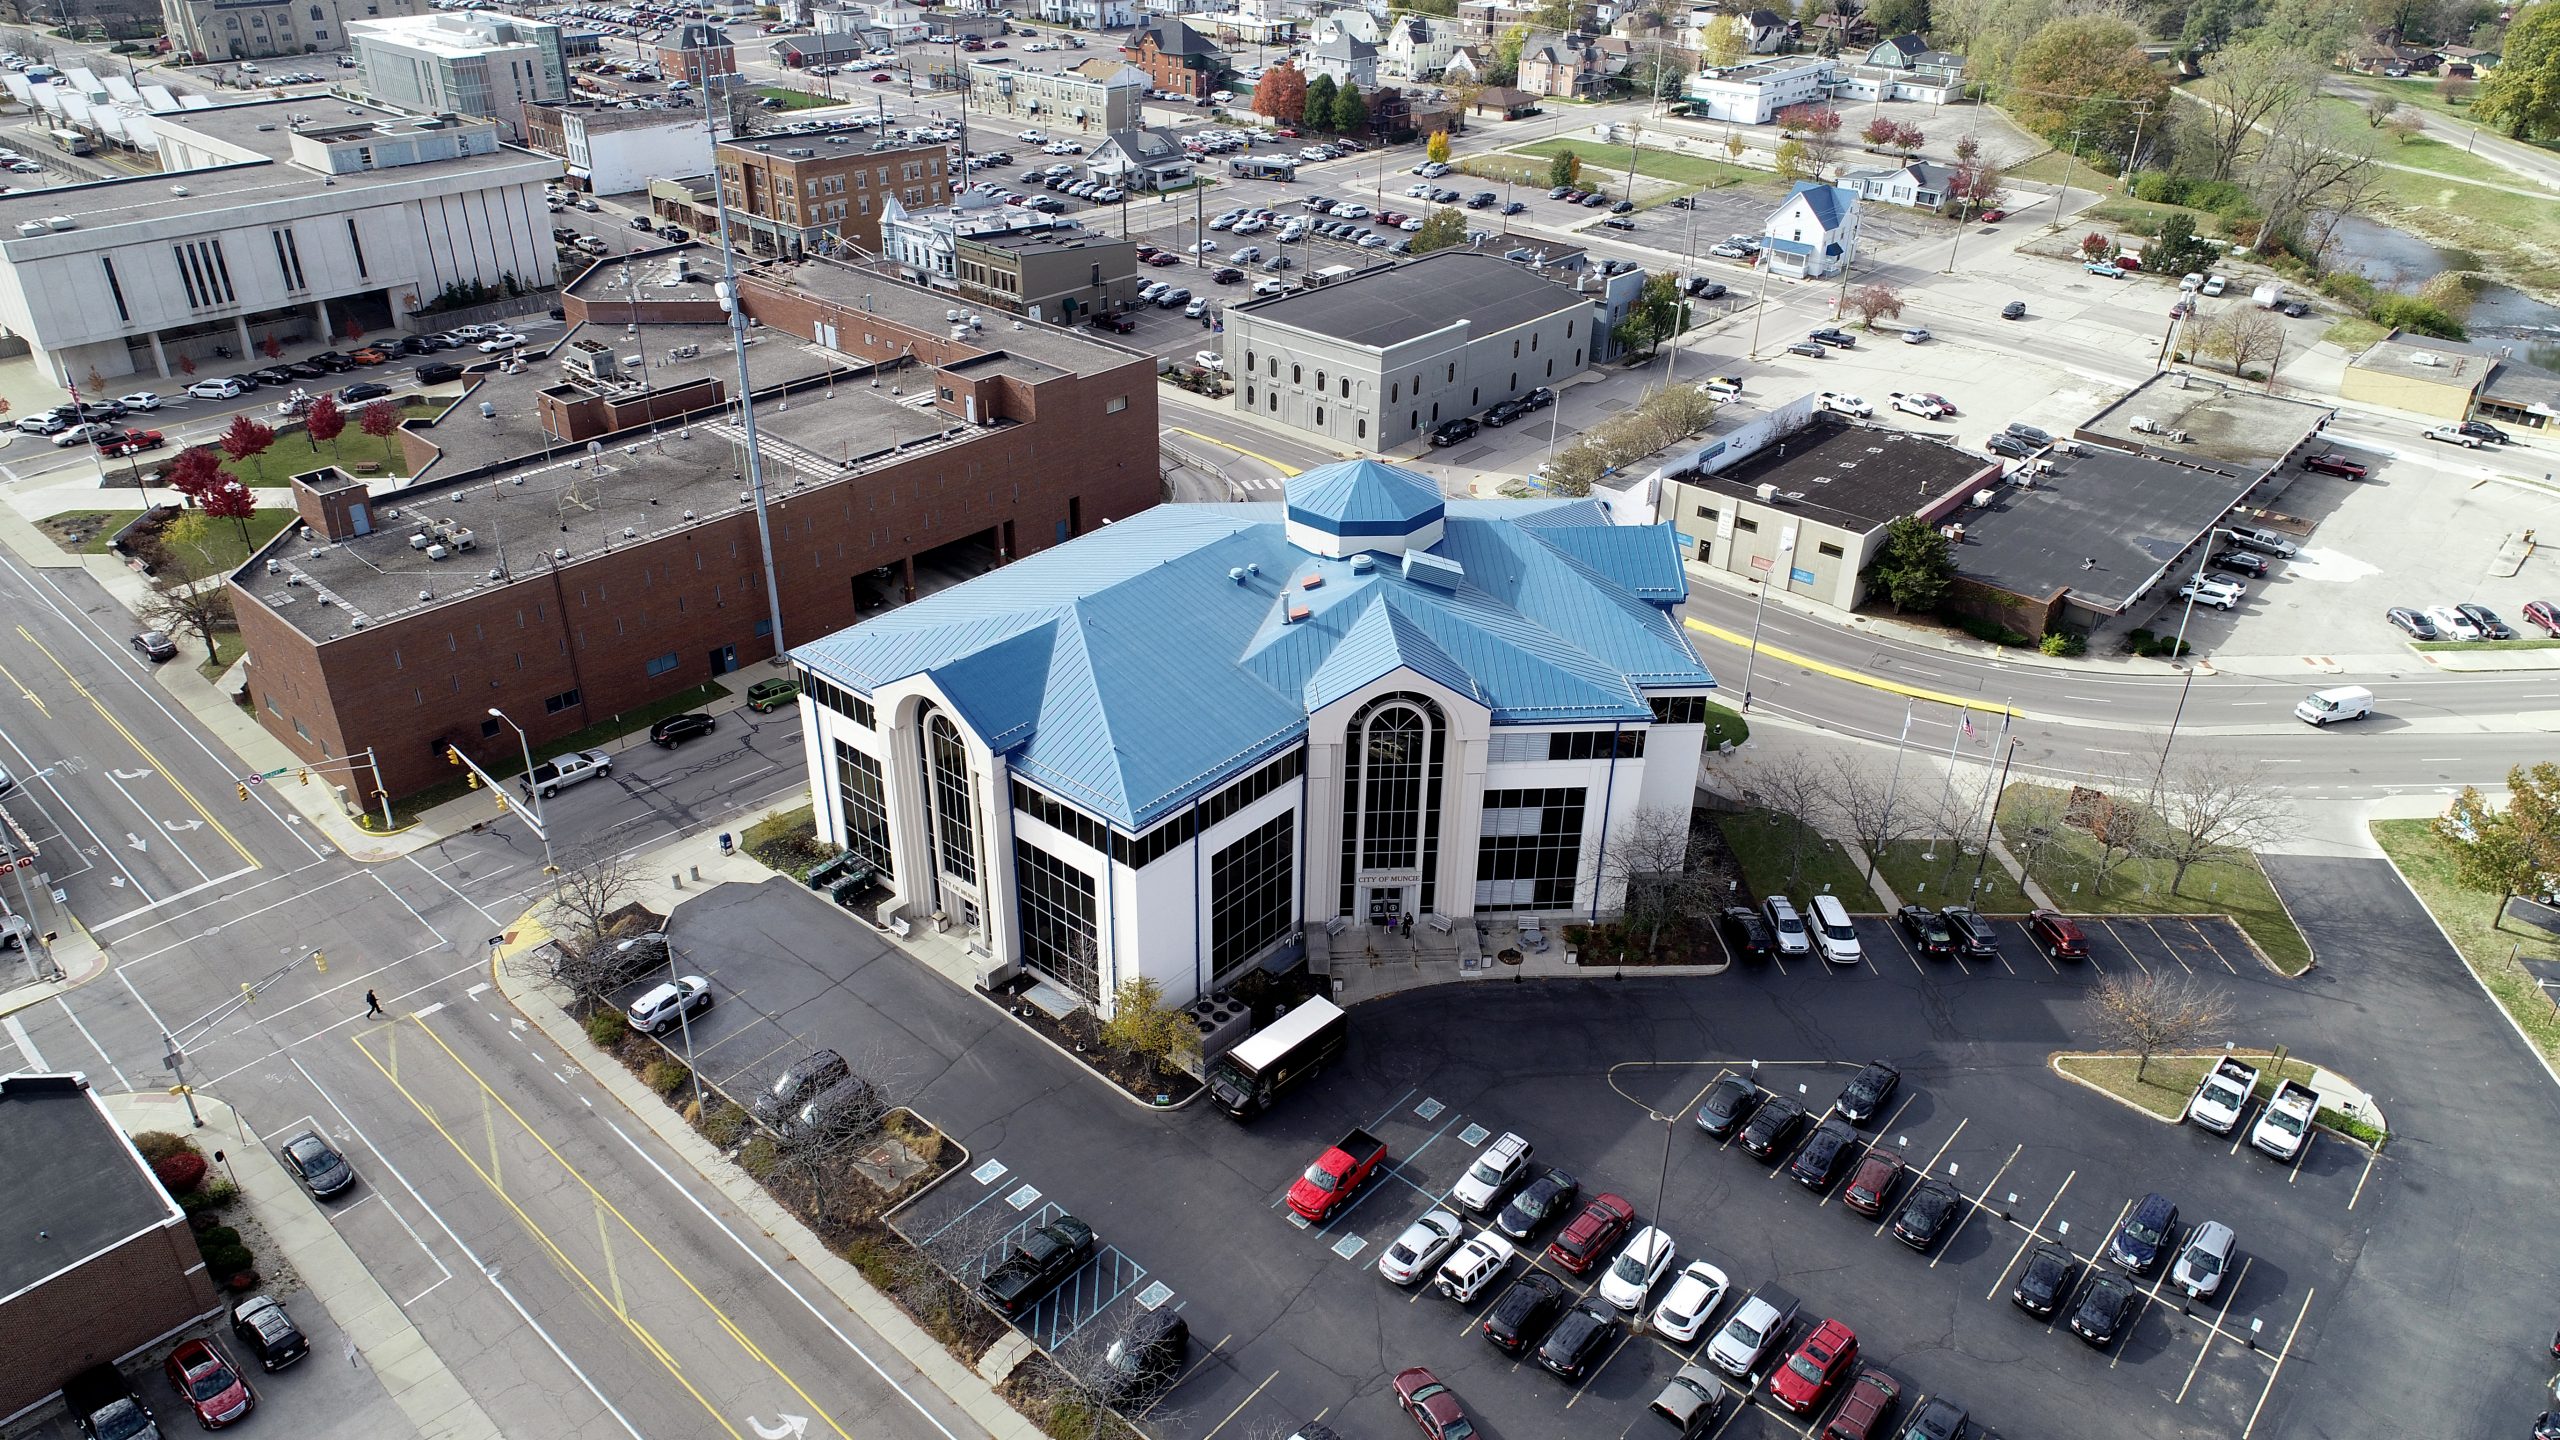 Muncie City hall commercial roofing project by ce reeve roofing in Indiana